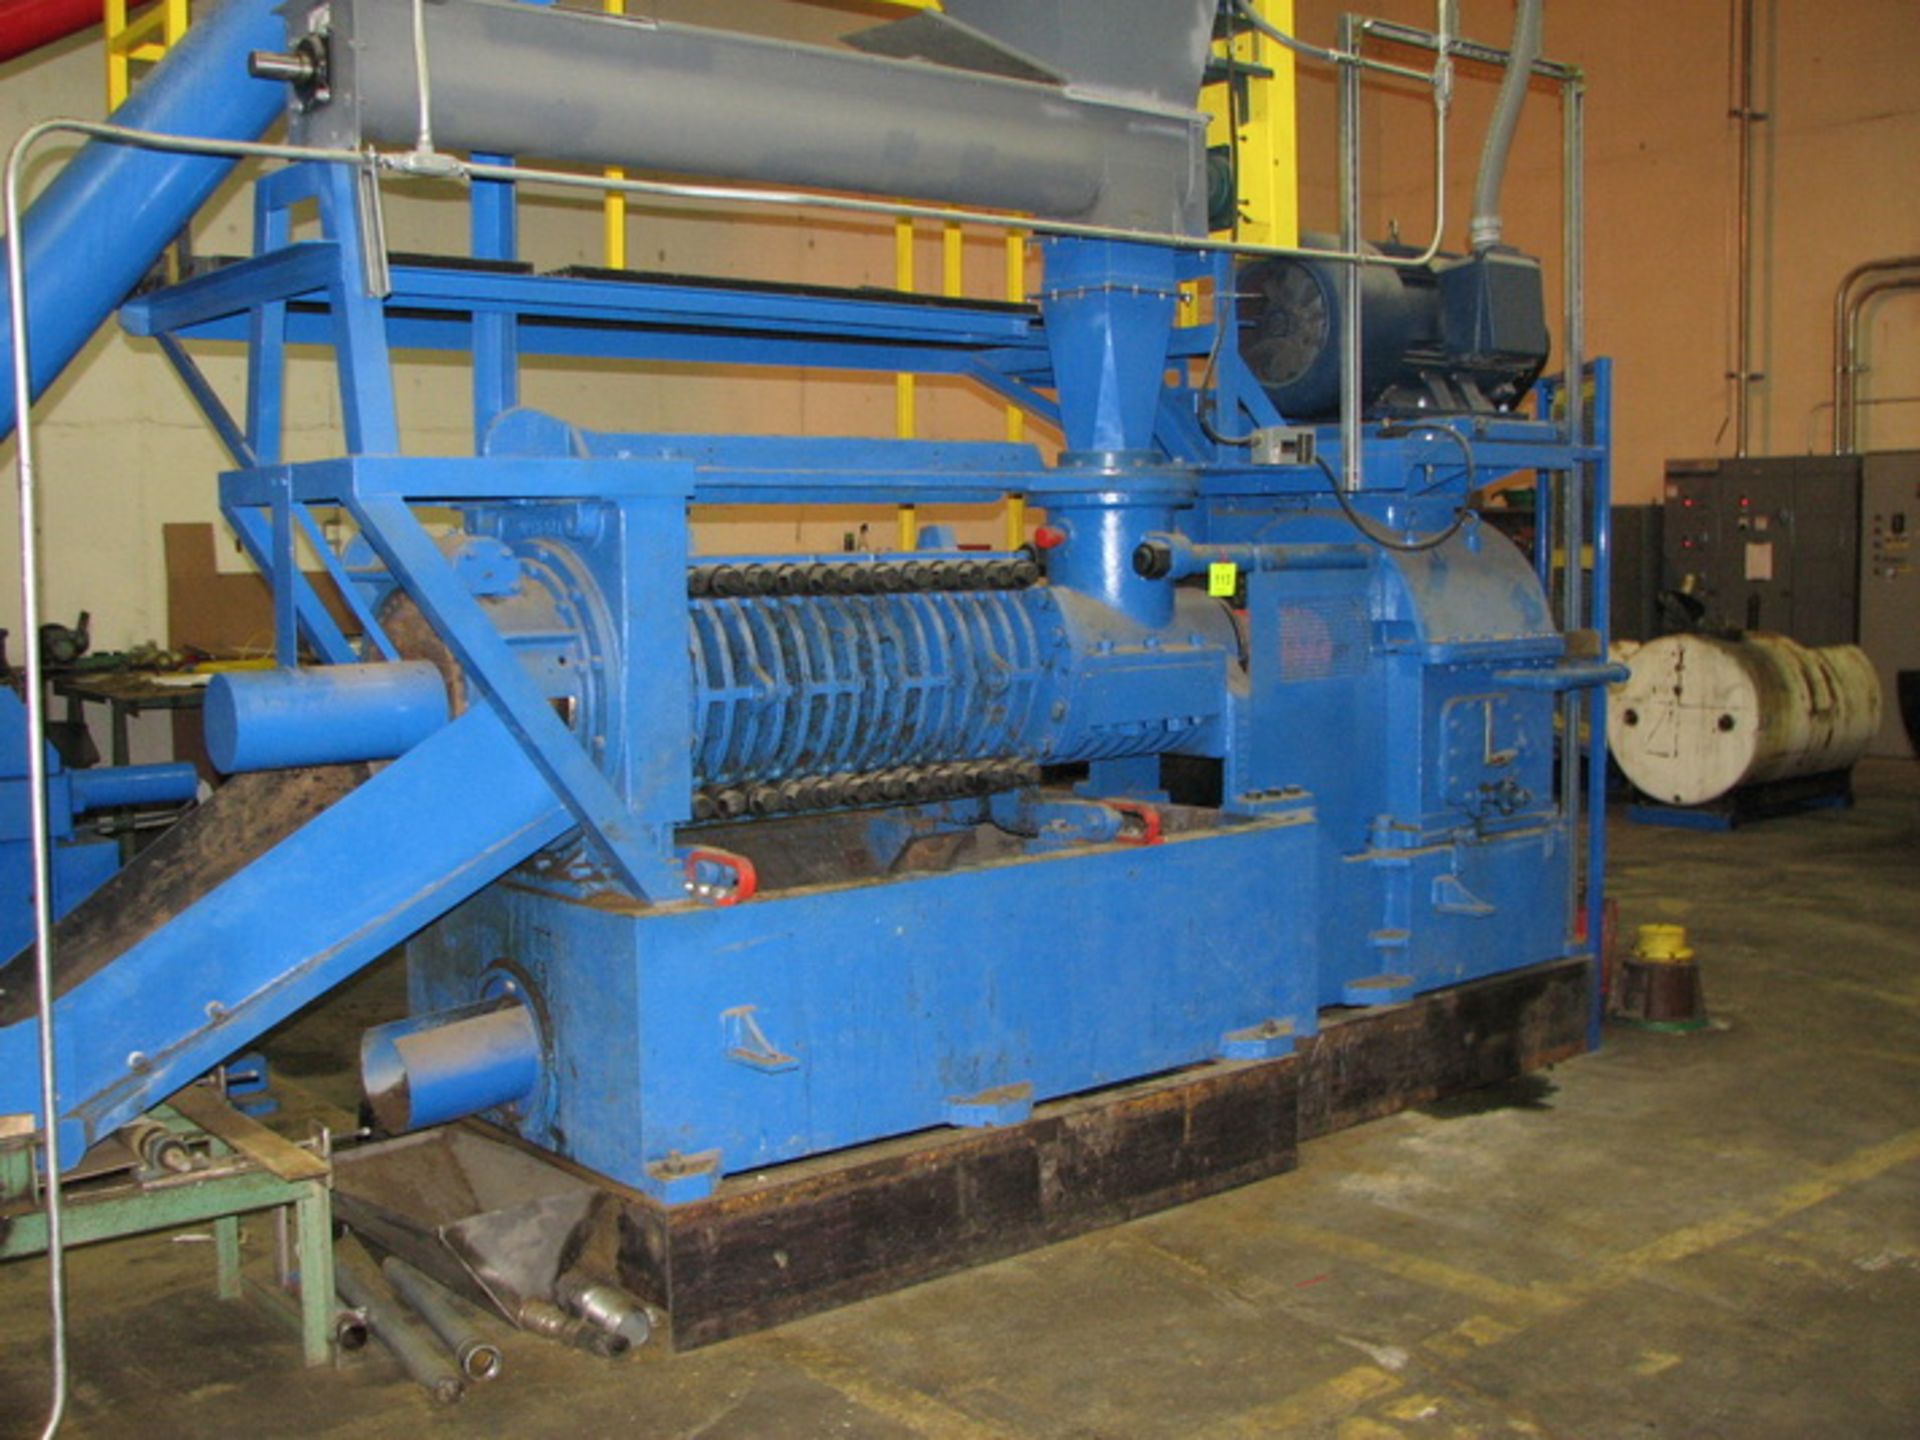 [Lot] French screw press, with 10" dia. x 8' L feed auger mount on top, 150 ton per day, Allen - Image 2 of 4